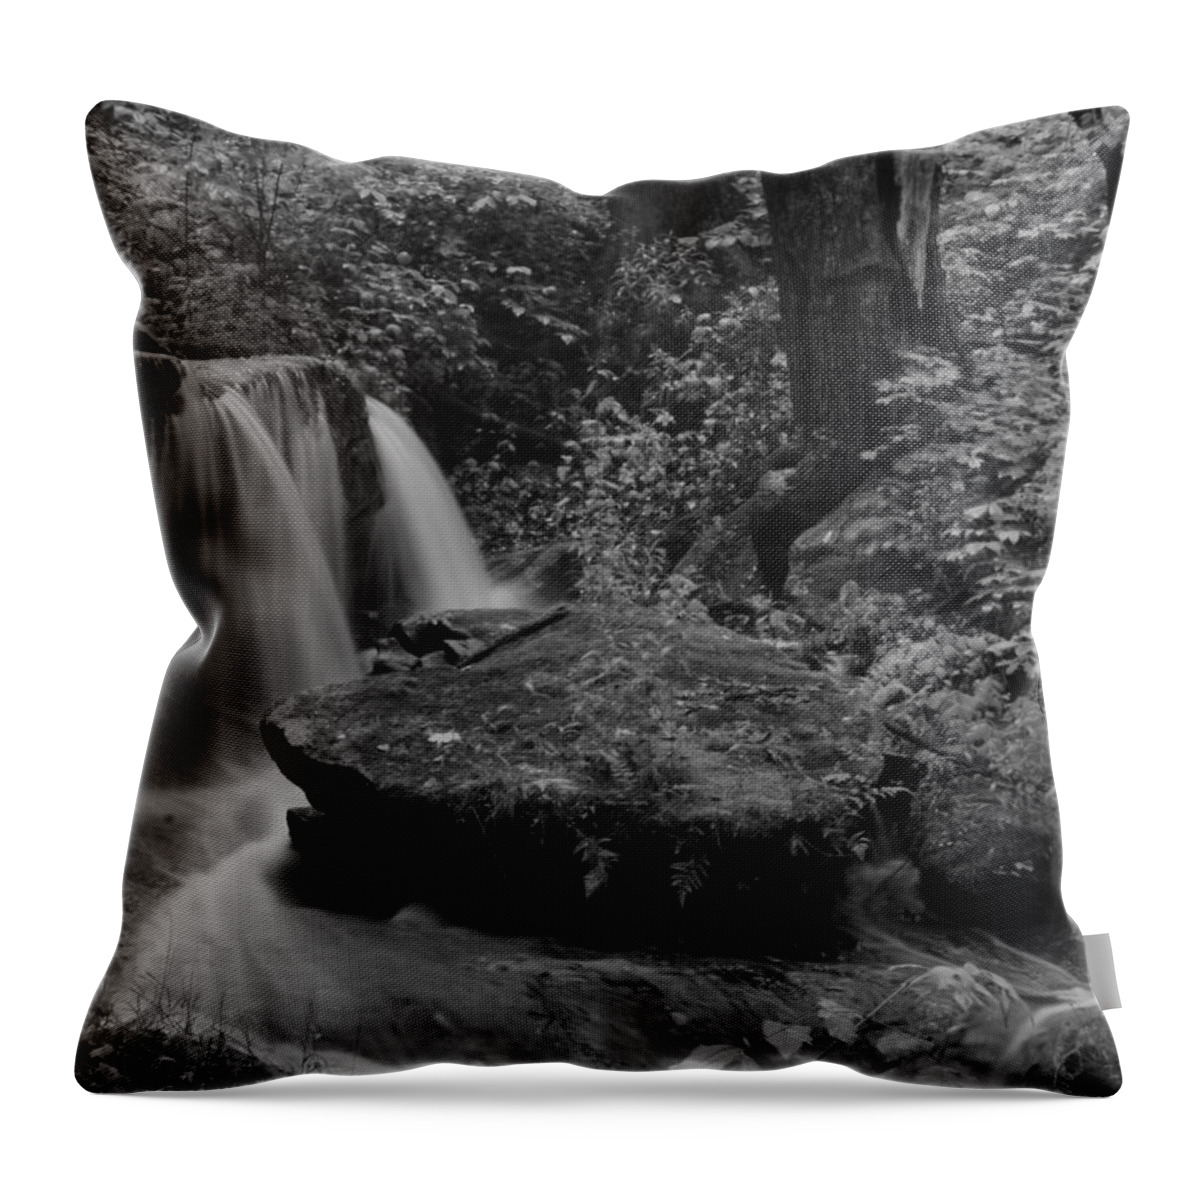  Throw Pillow featuring the photograph Liberty Park by Brad Nellis